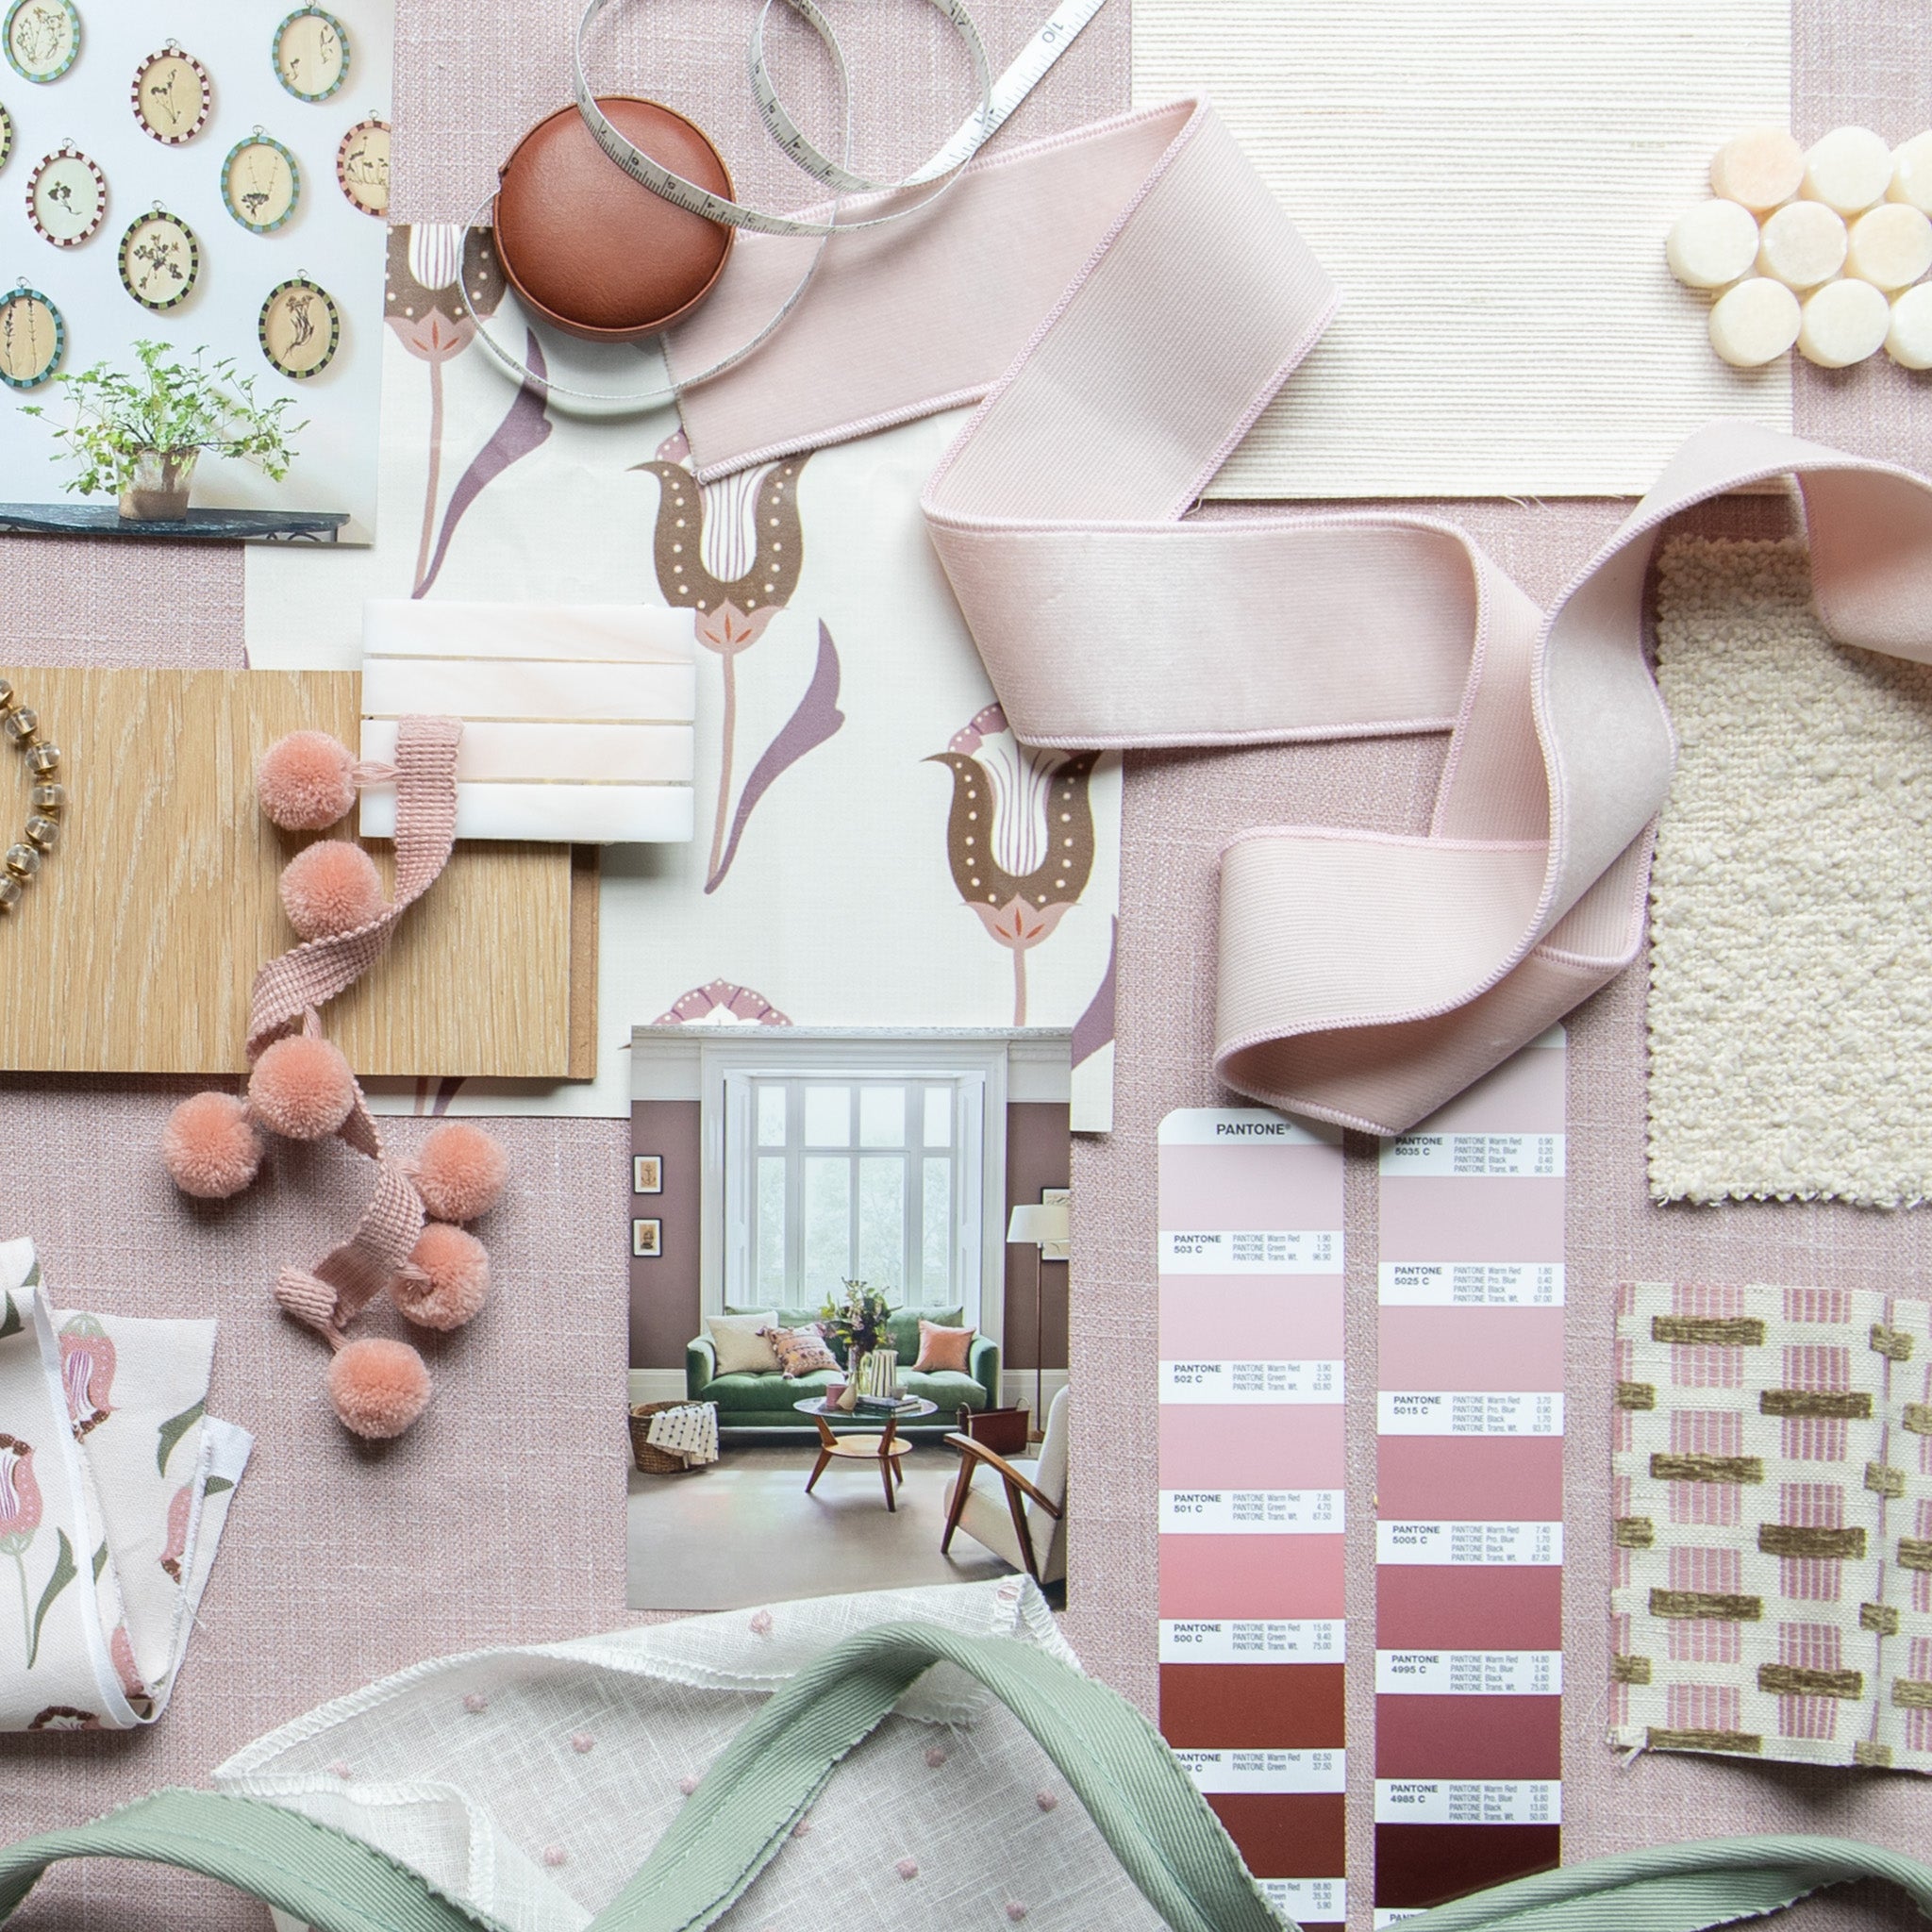 interior design mood board and fabric with pink paint swatches, chenille fabric swatches, pink trim, and tiles